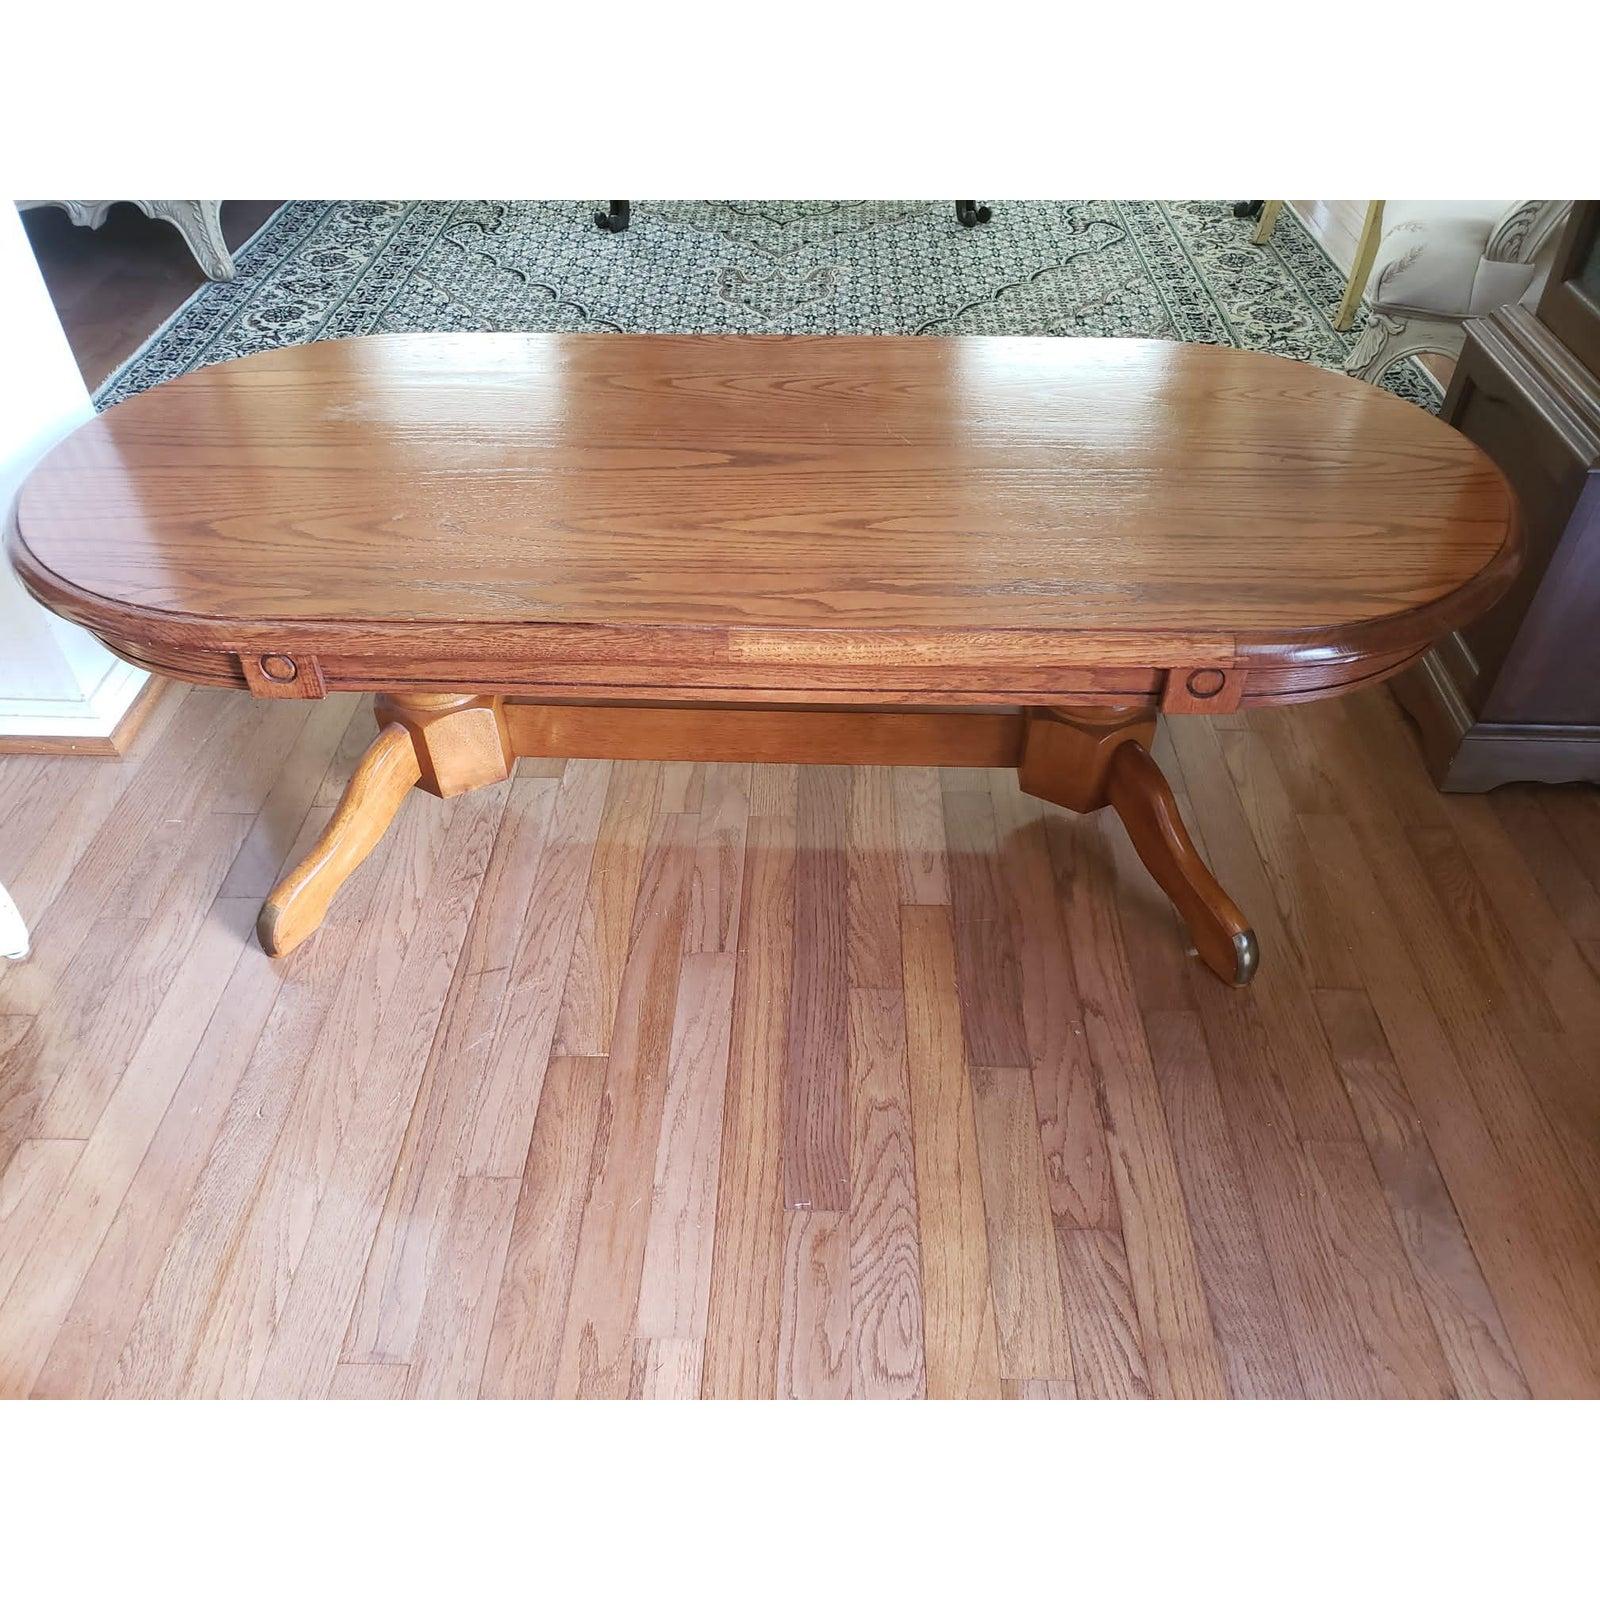 1970s Mid-Century Modern Pedestal Tiger Oak Coffee Table In Good Condition For Sale In Germantown, MD